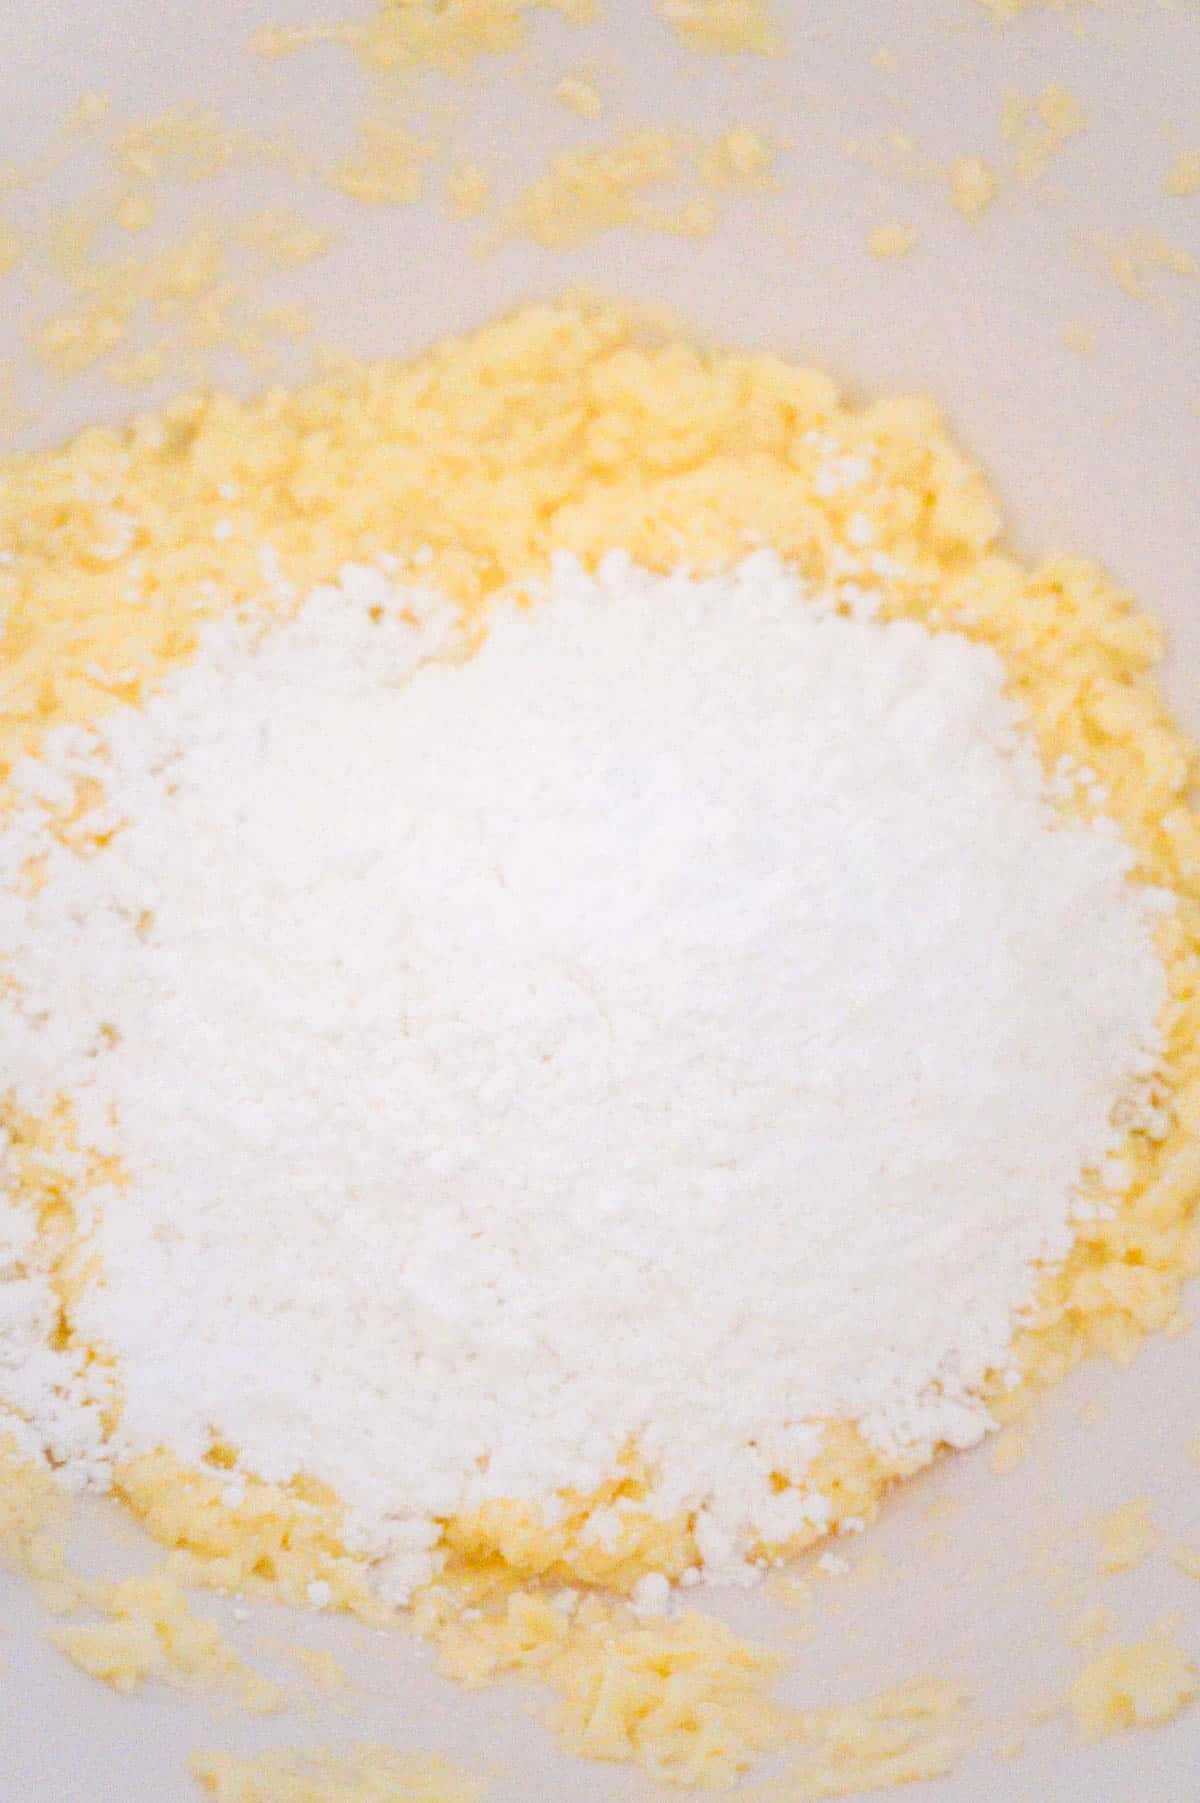 icing sugar on top of butter and egg white mixture in a mixing bowl